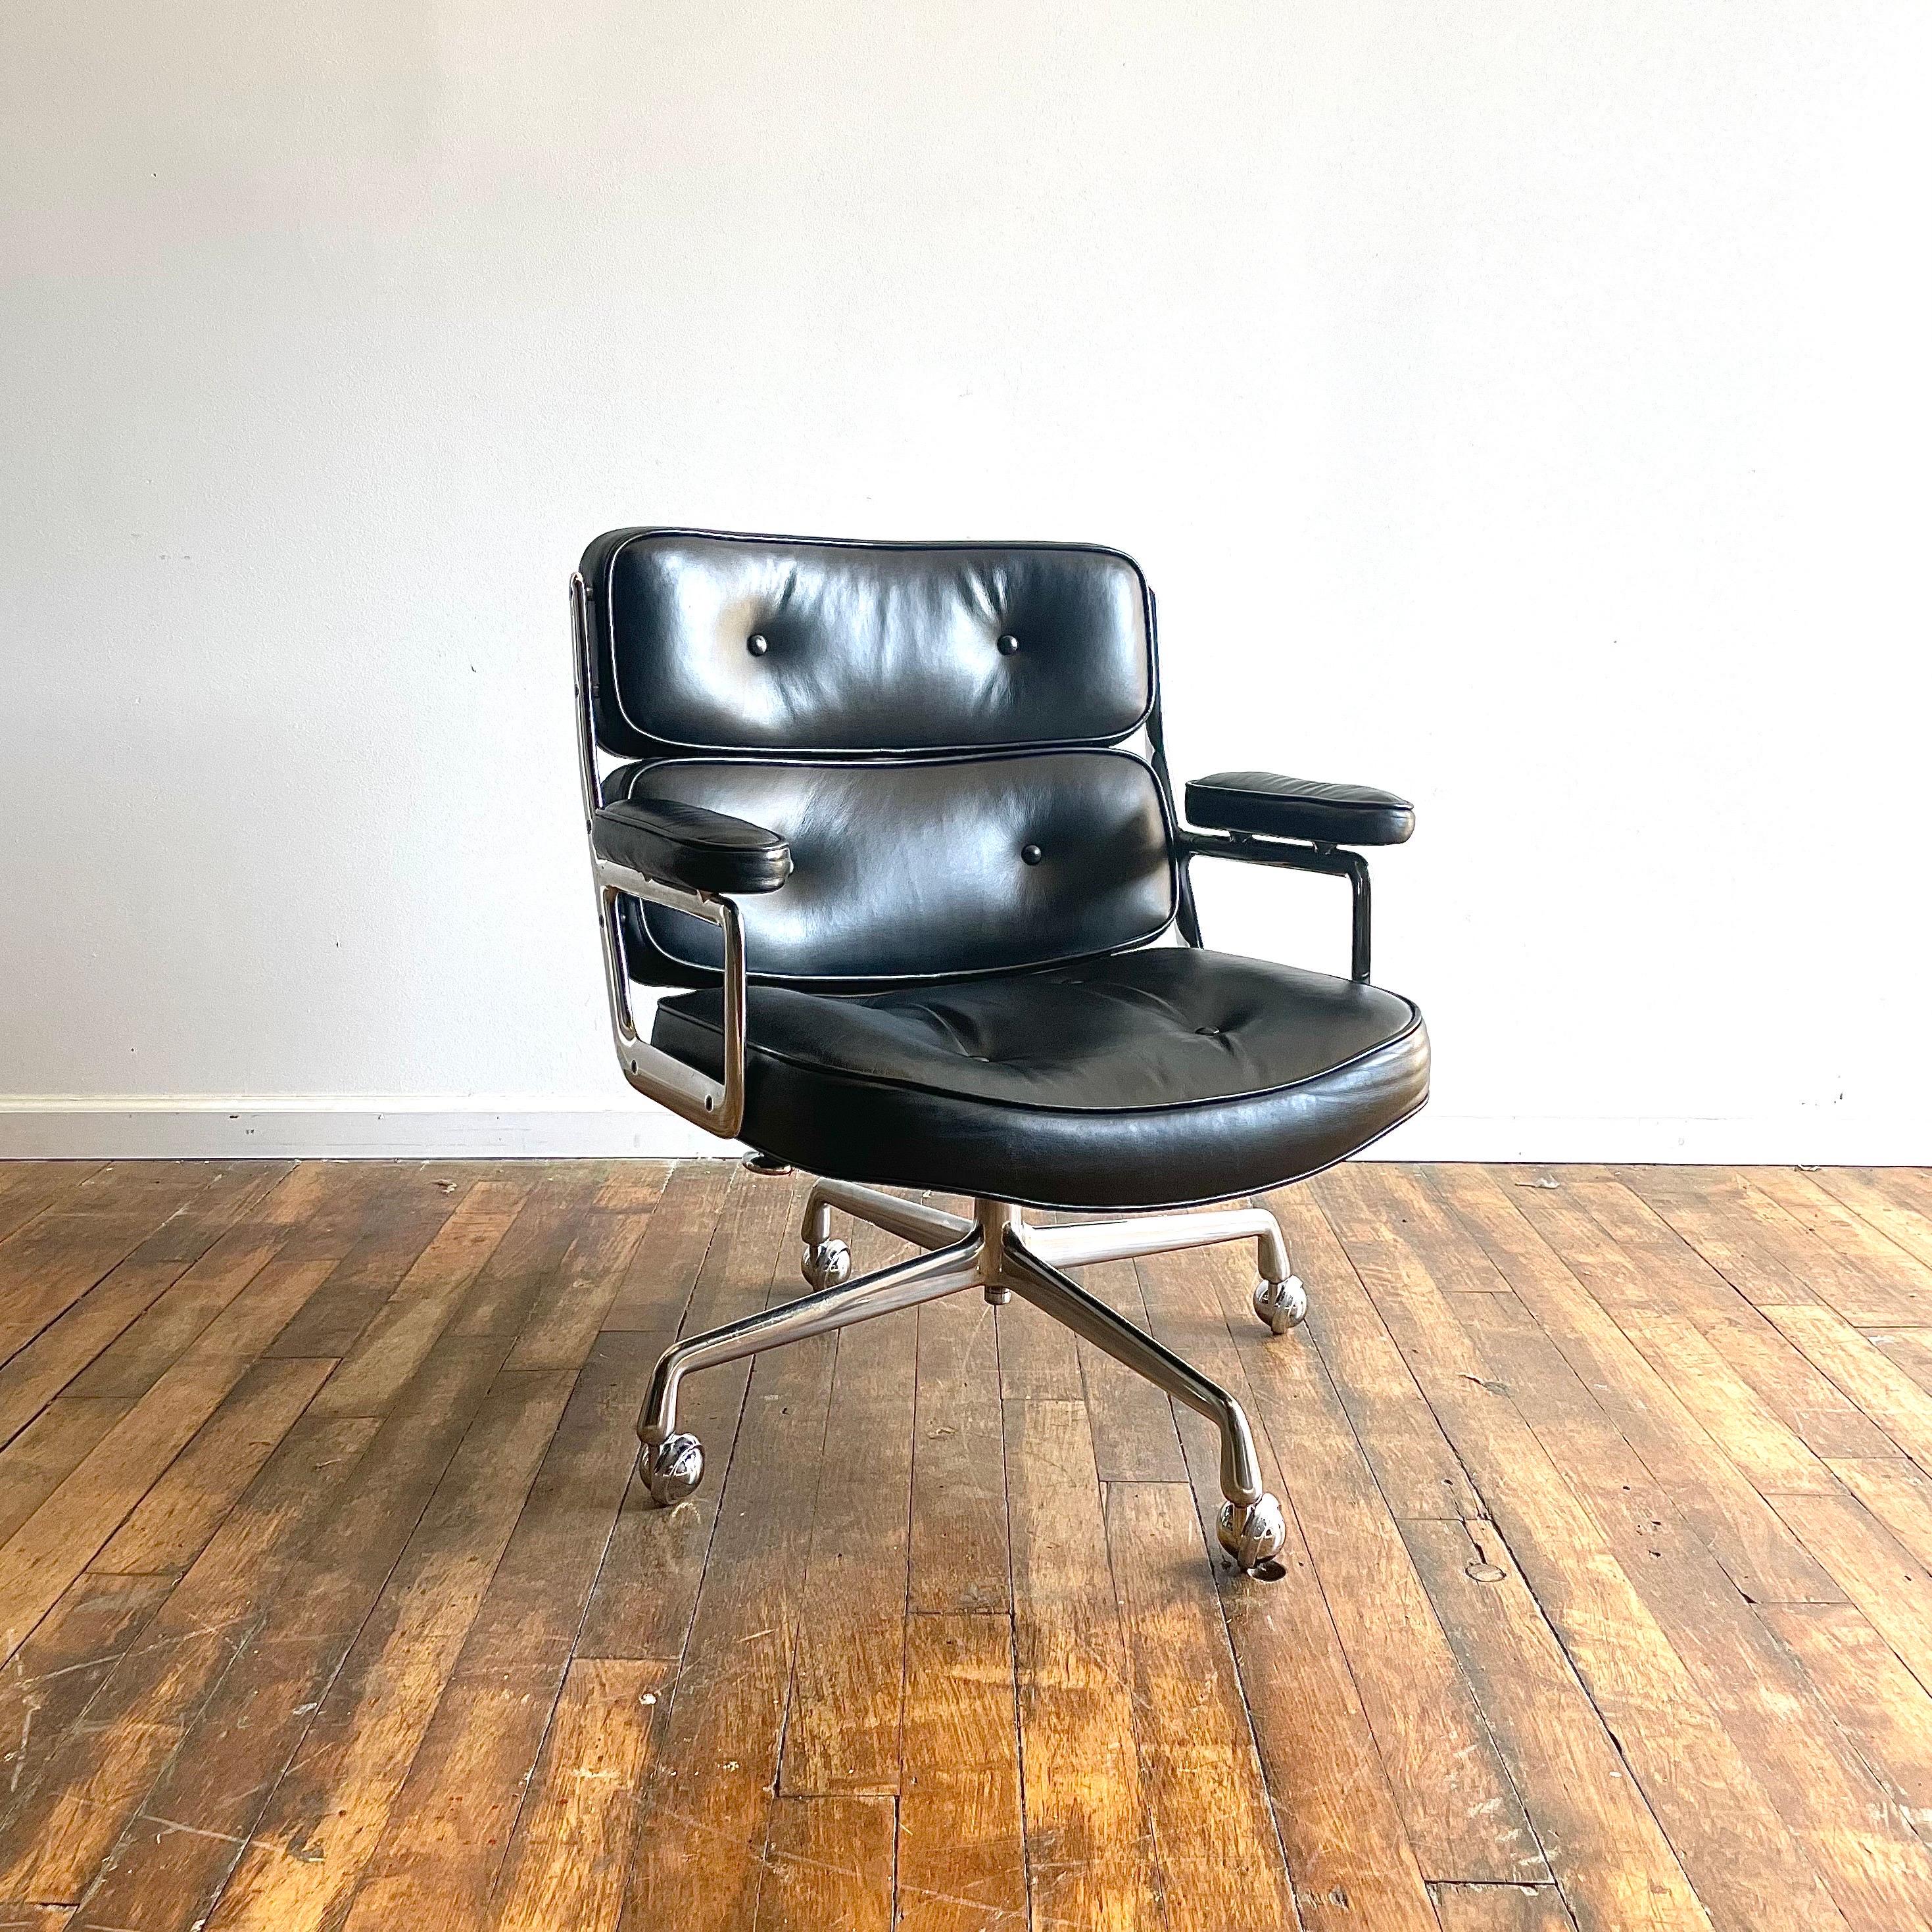 Authentic Herman Miller Eames Time Life Lobby chair. 

Rare model with wide back. No longer in production. 4 star base. 

Classic Eames office chair with padded leather armrests. 

Signed under the seat. 

Tilts, swivels, height adjusted. 

More